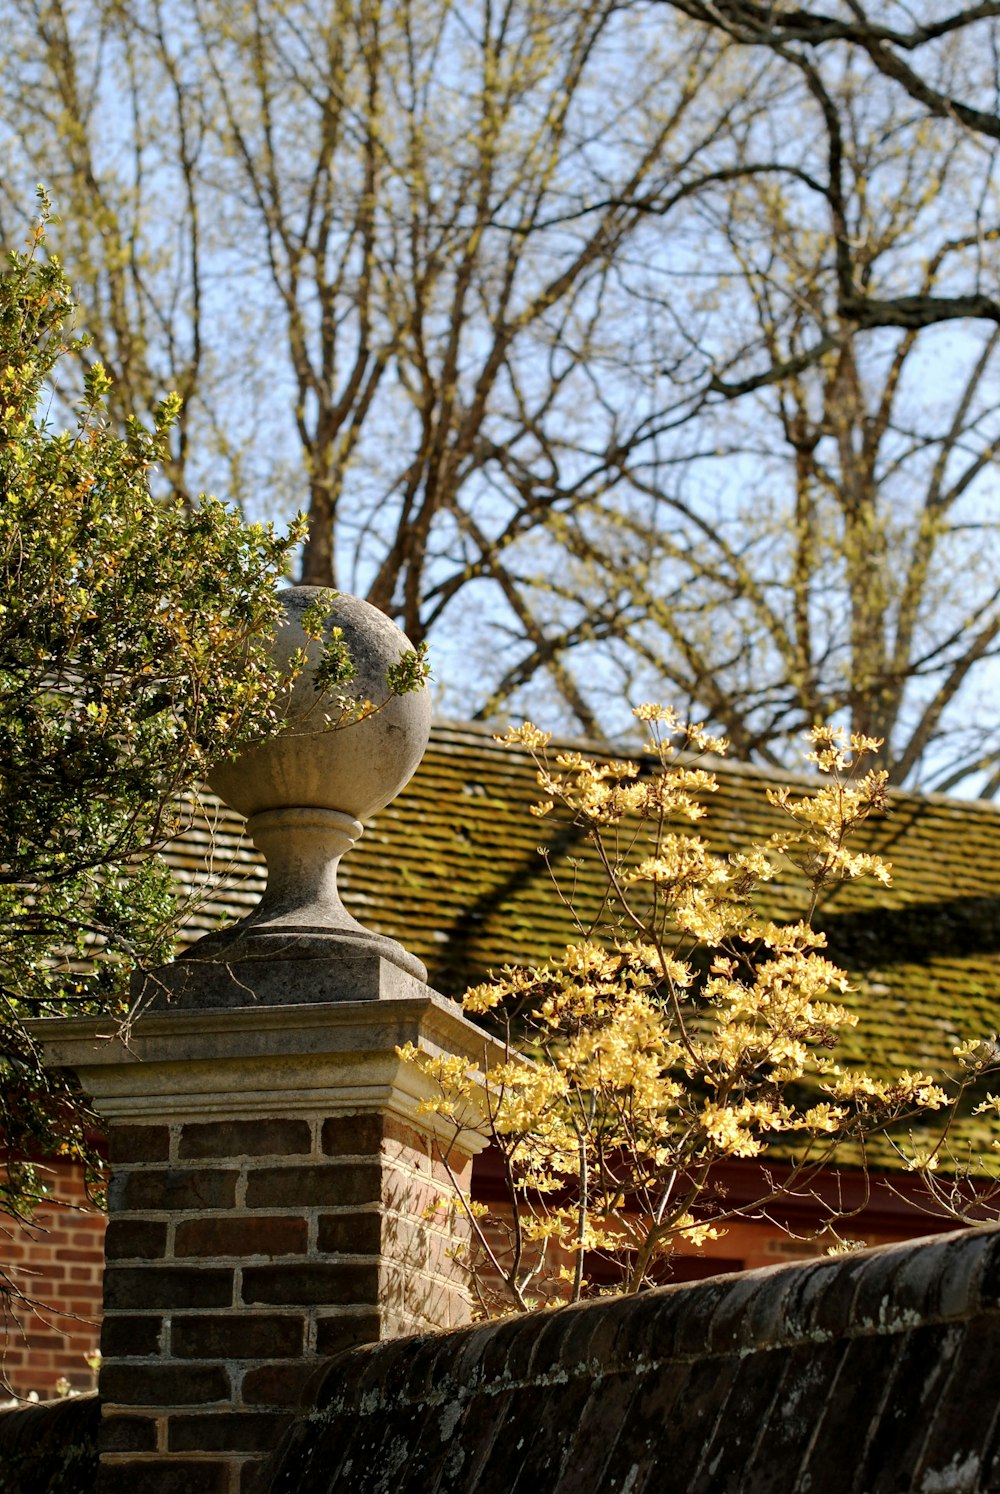 a stone chimney on a roof